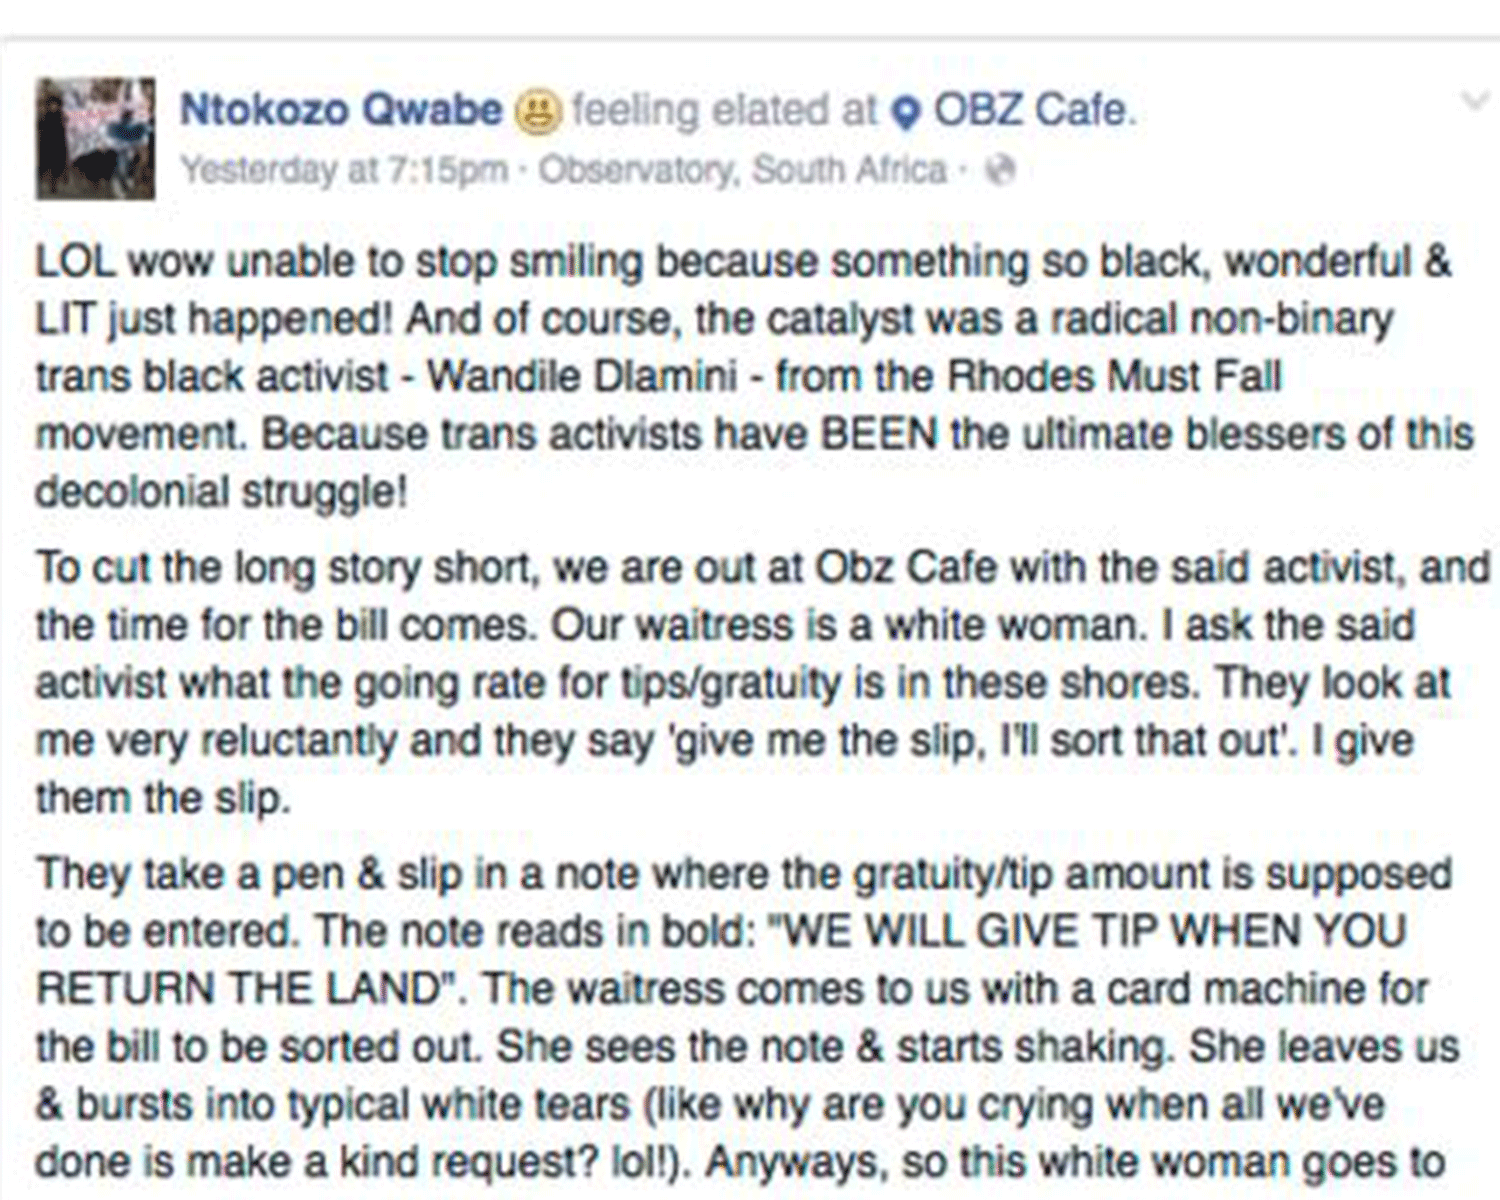 The Facebook post which appears to be written by Ntokozo Qwabe. He says later 'go to your fellow white people and mobilise for them to give us our land back.'